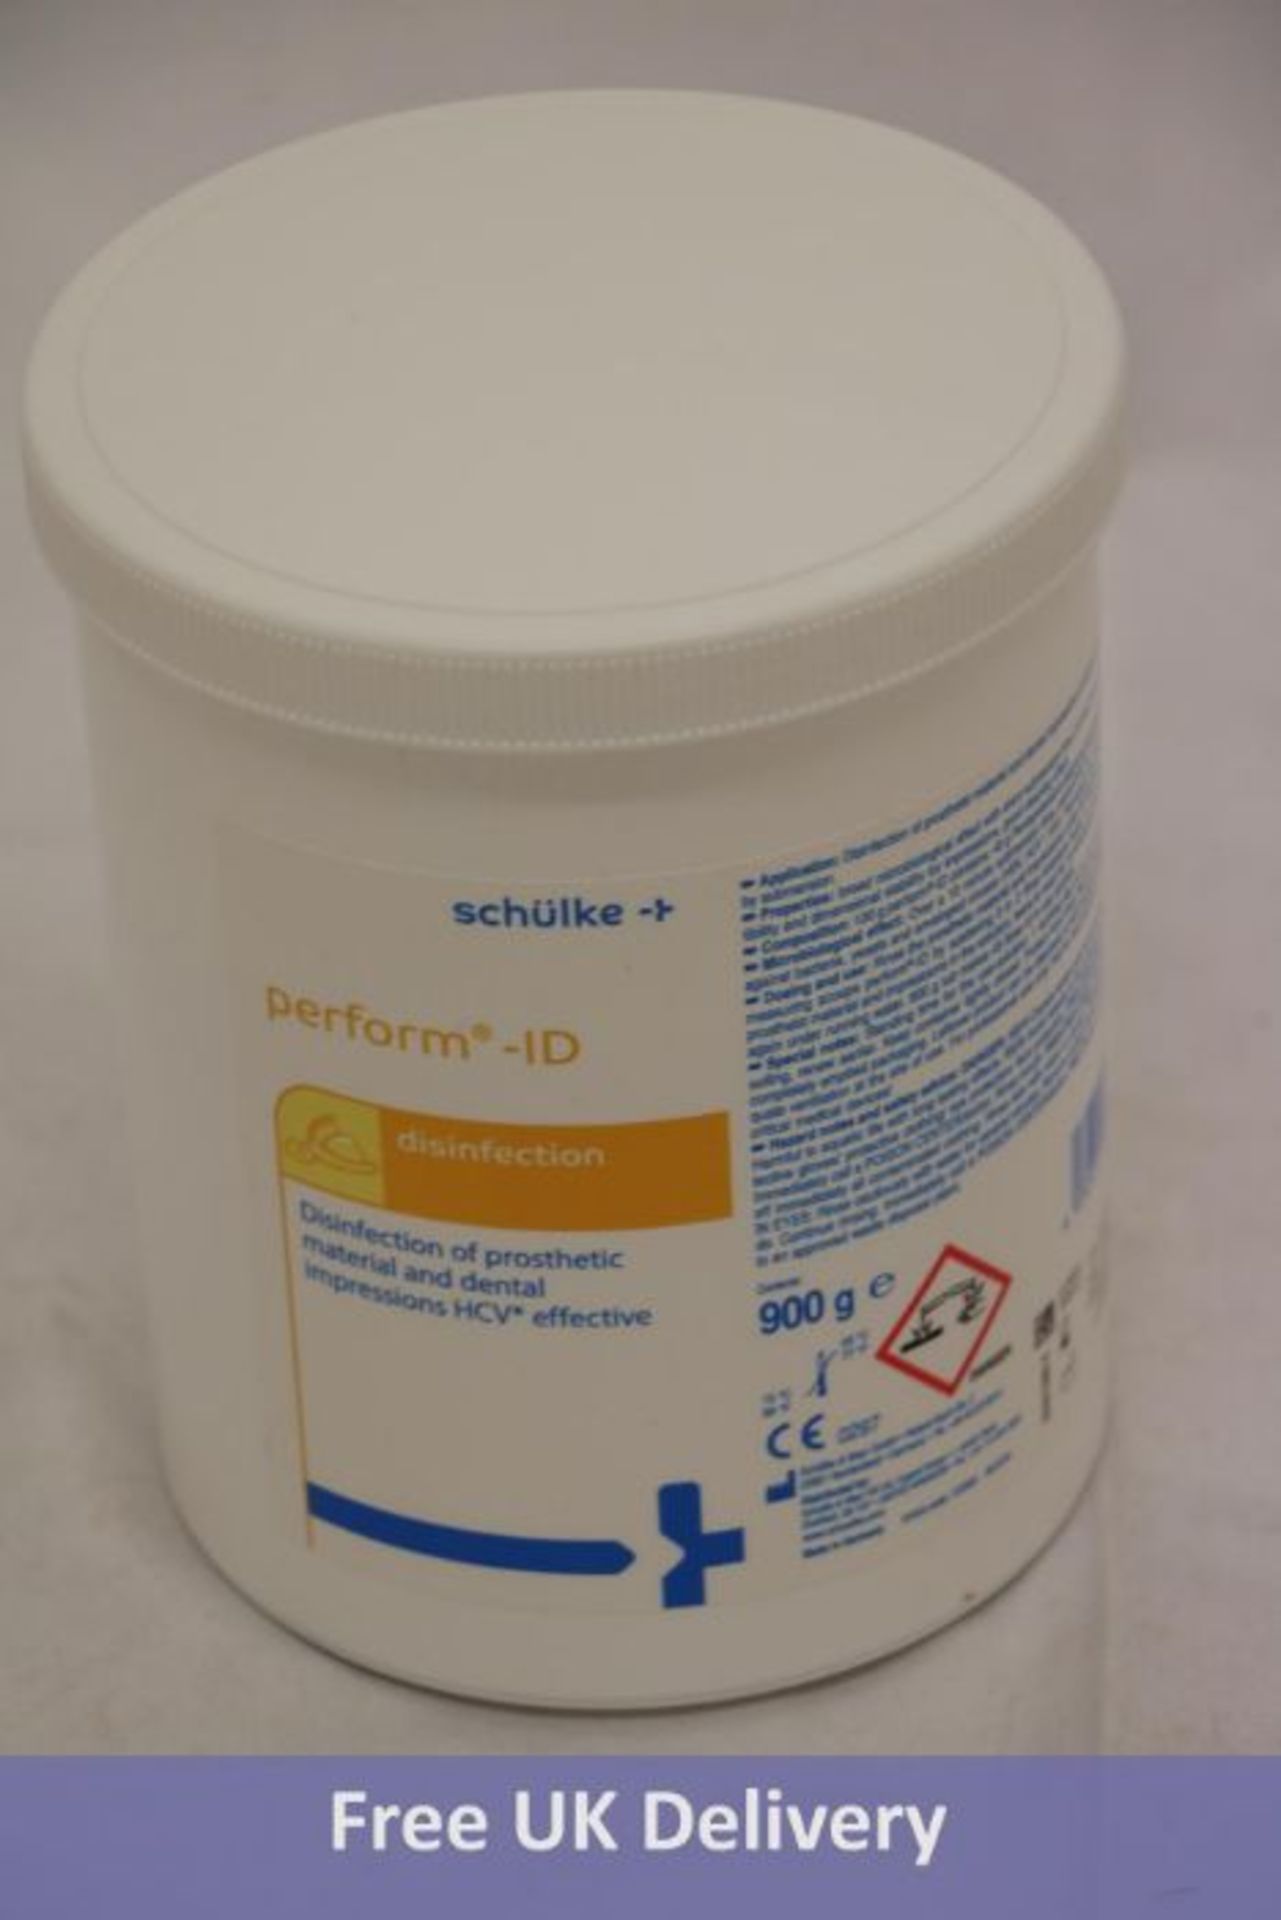 Two Schulke Perform ID Disinfectant, 900g, Durr Dental Orotol Concentrate 2.5L, 2x